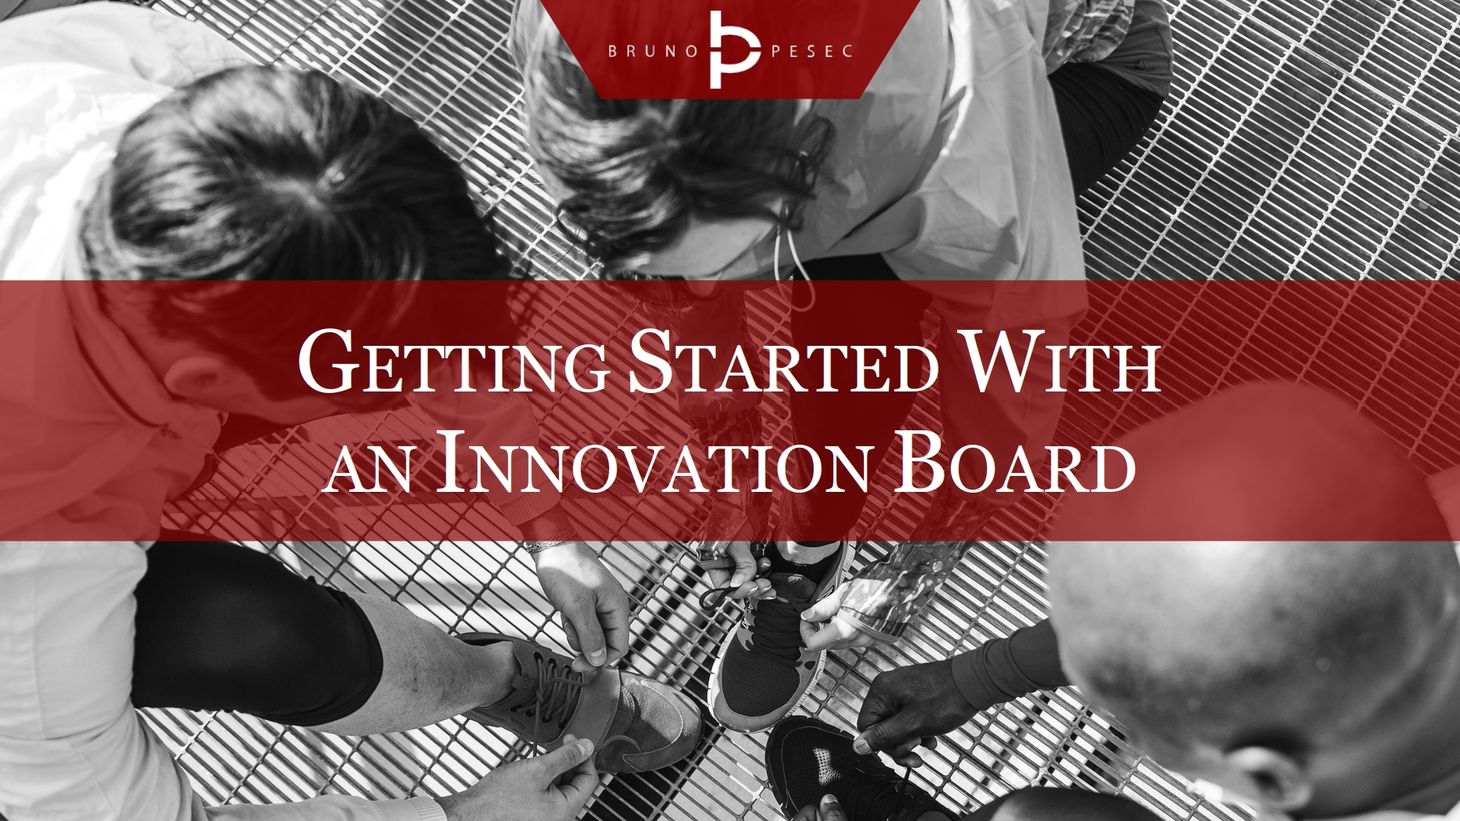 Getting started with an Innovation Board